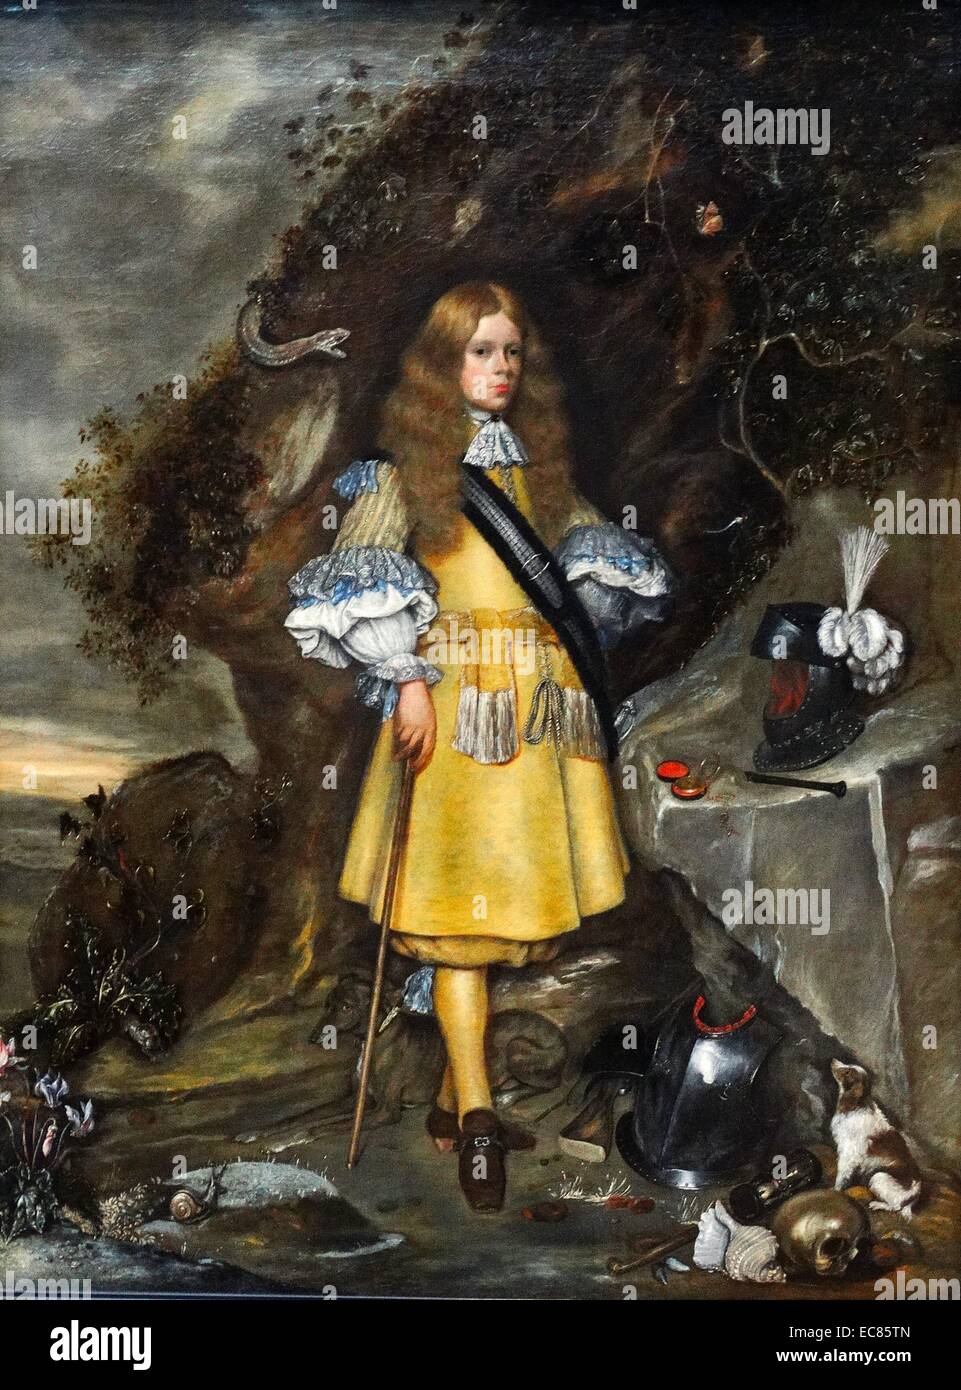 Memorial Portrait of Moses ter Borch. Painted by Gerard ter Borch (1617-1681) and Gesina ter Borch (1633-1690). Dated 17th Century Stock Photo